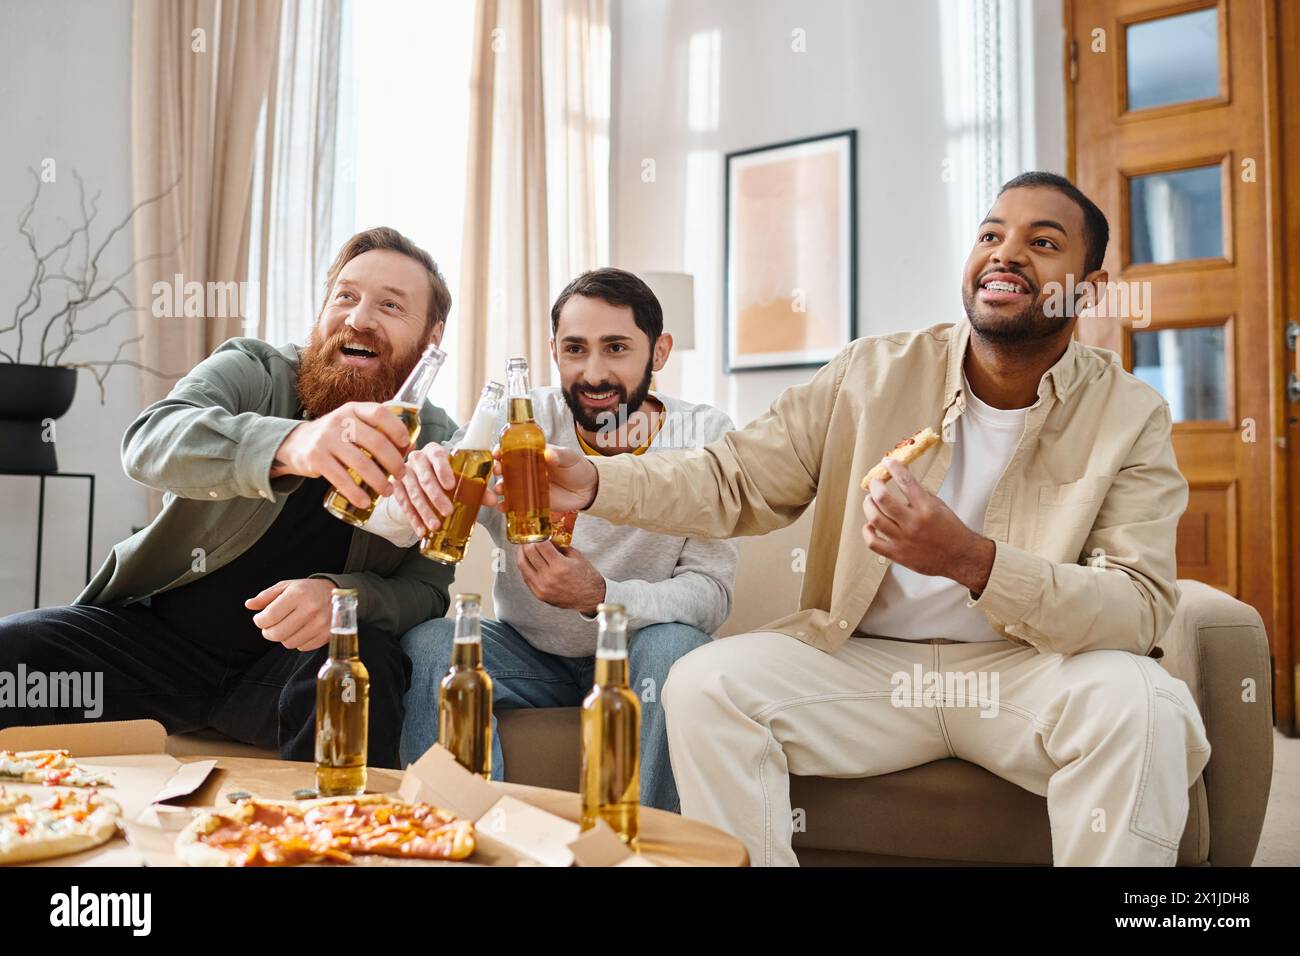 Three cheerful, handsome men of different races enjoy a casual get-together, sitting around a table with beers. Stock Photo